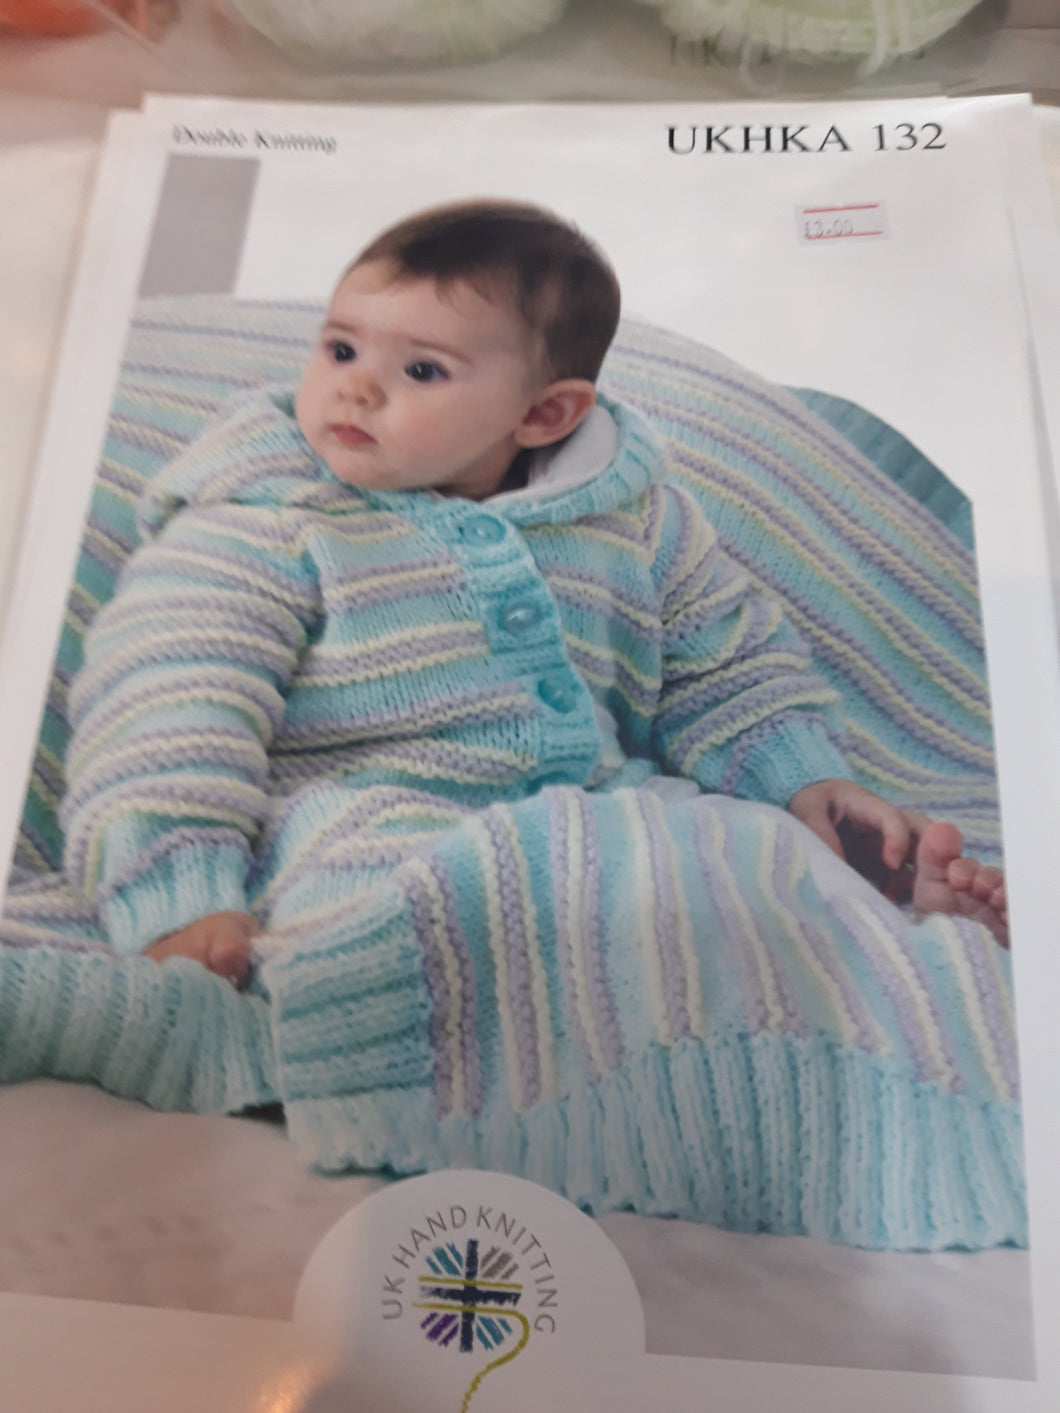 UKHKA 132 - Baby Double Knit - Cardigan and Blanket - 12